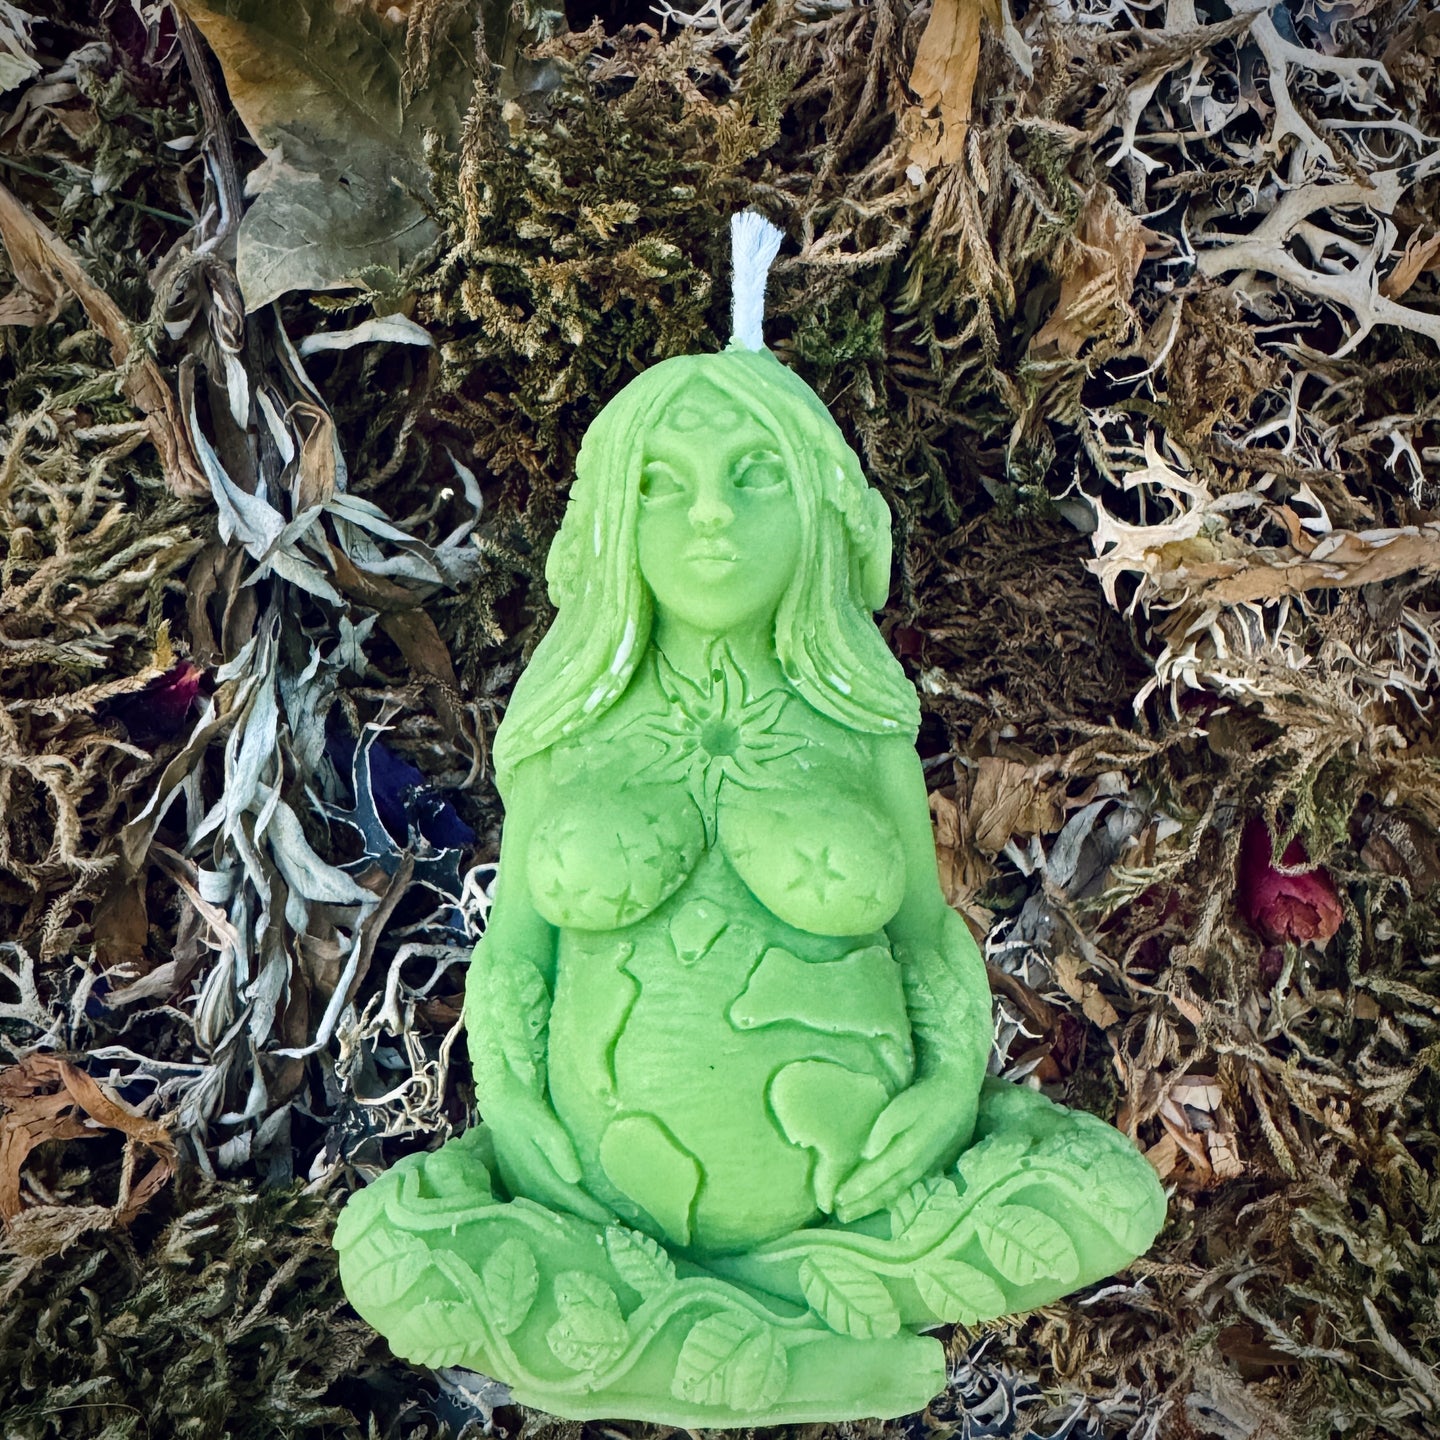 Earth Mother Goddess Shaped Candle